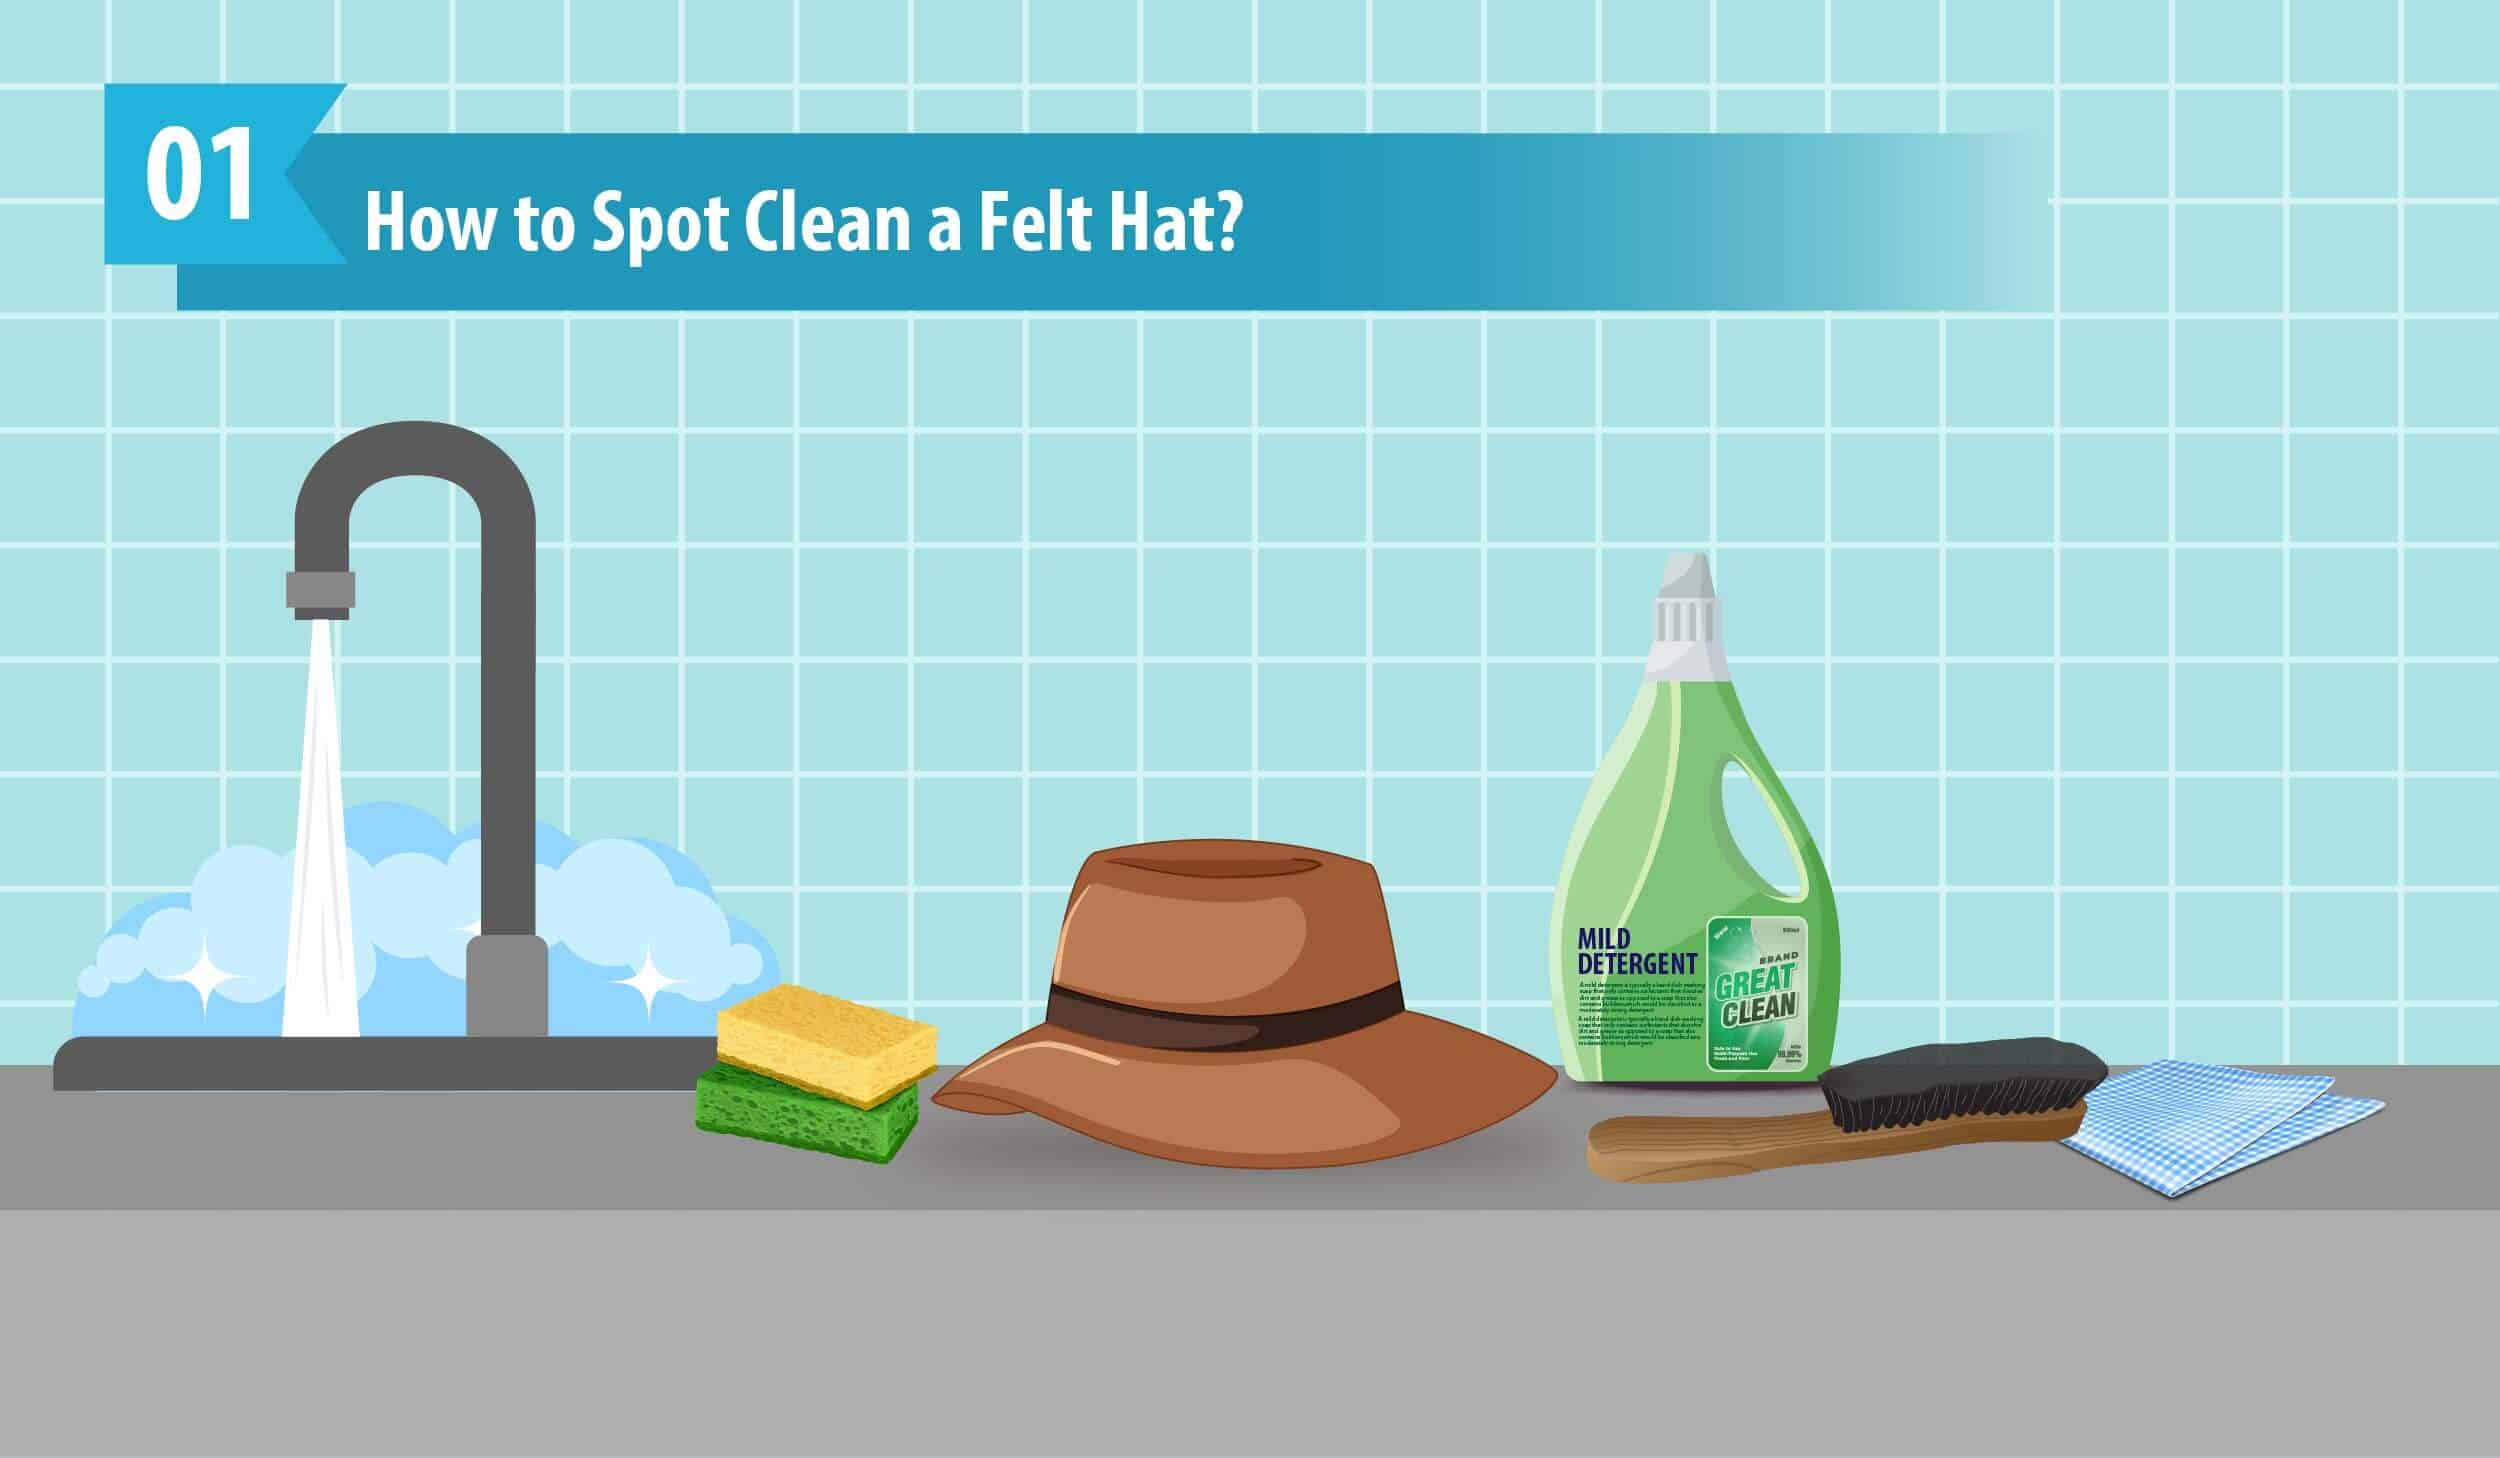 How to Spot Clean a Felt Hat